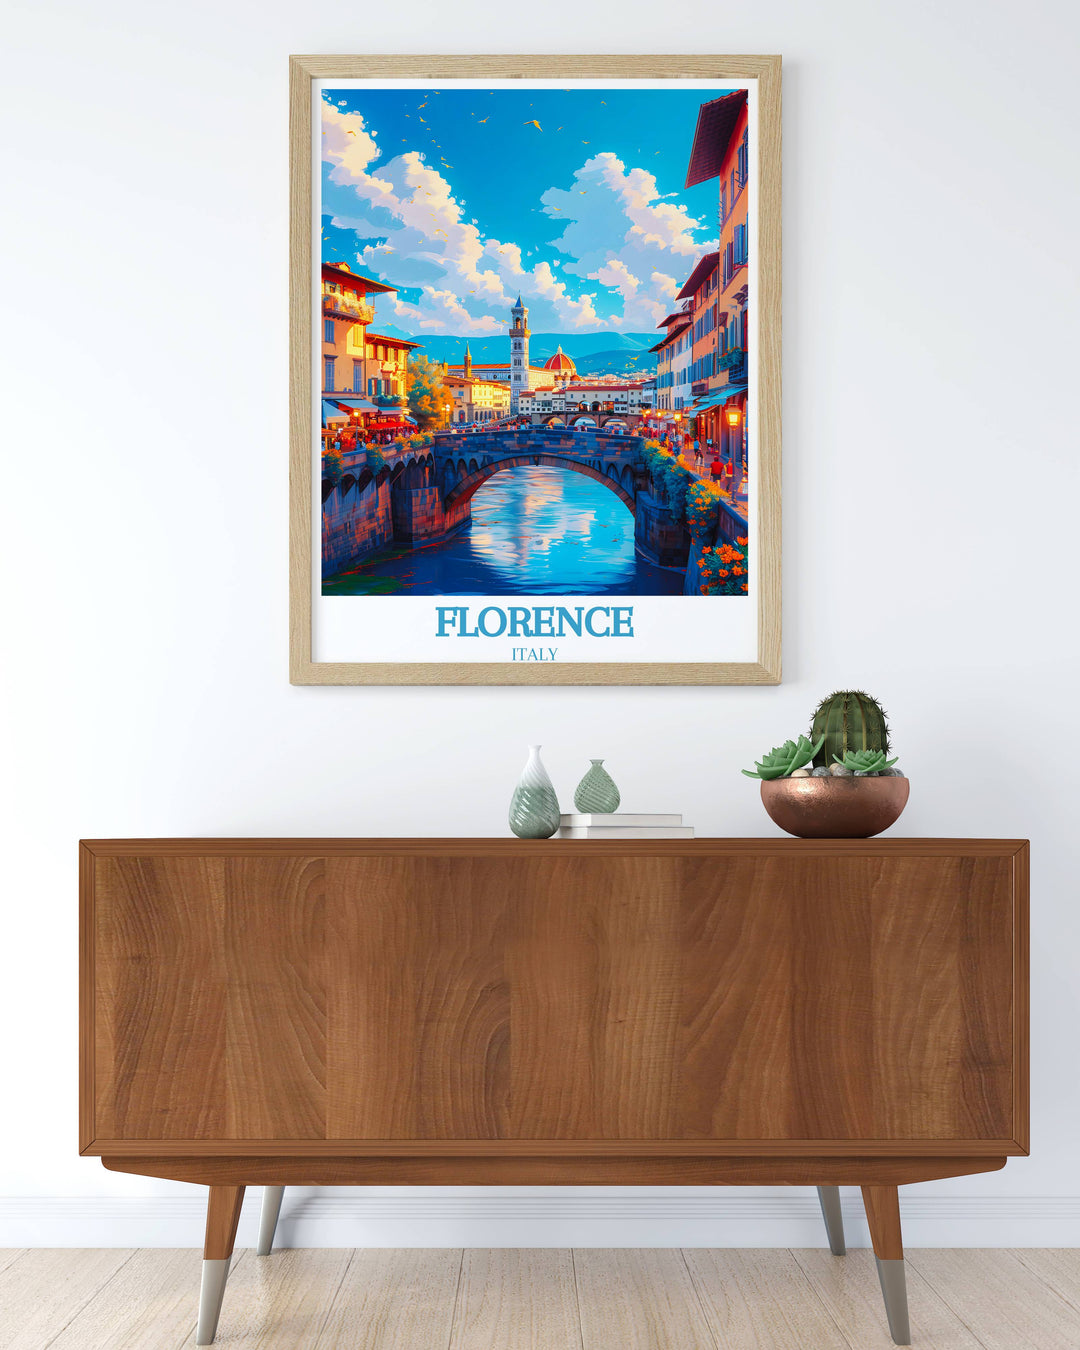 An artist by Ponte Vecchio paints the bridges storied beauty, a scene that translates beautifully into travel posters and art prints for cultural decor